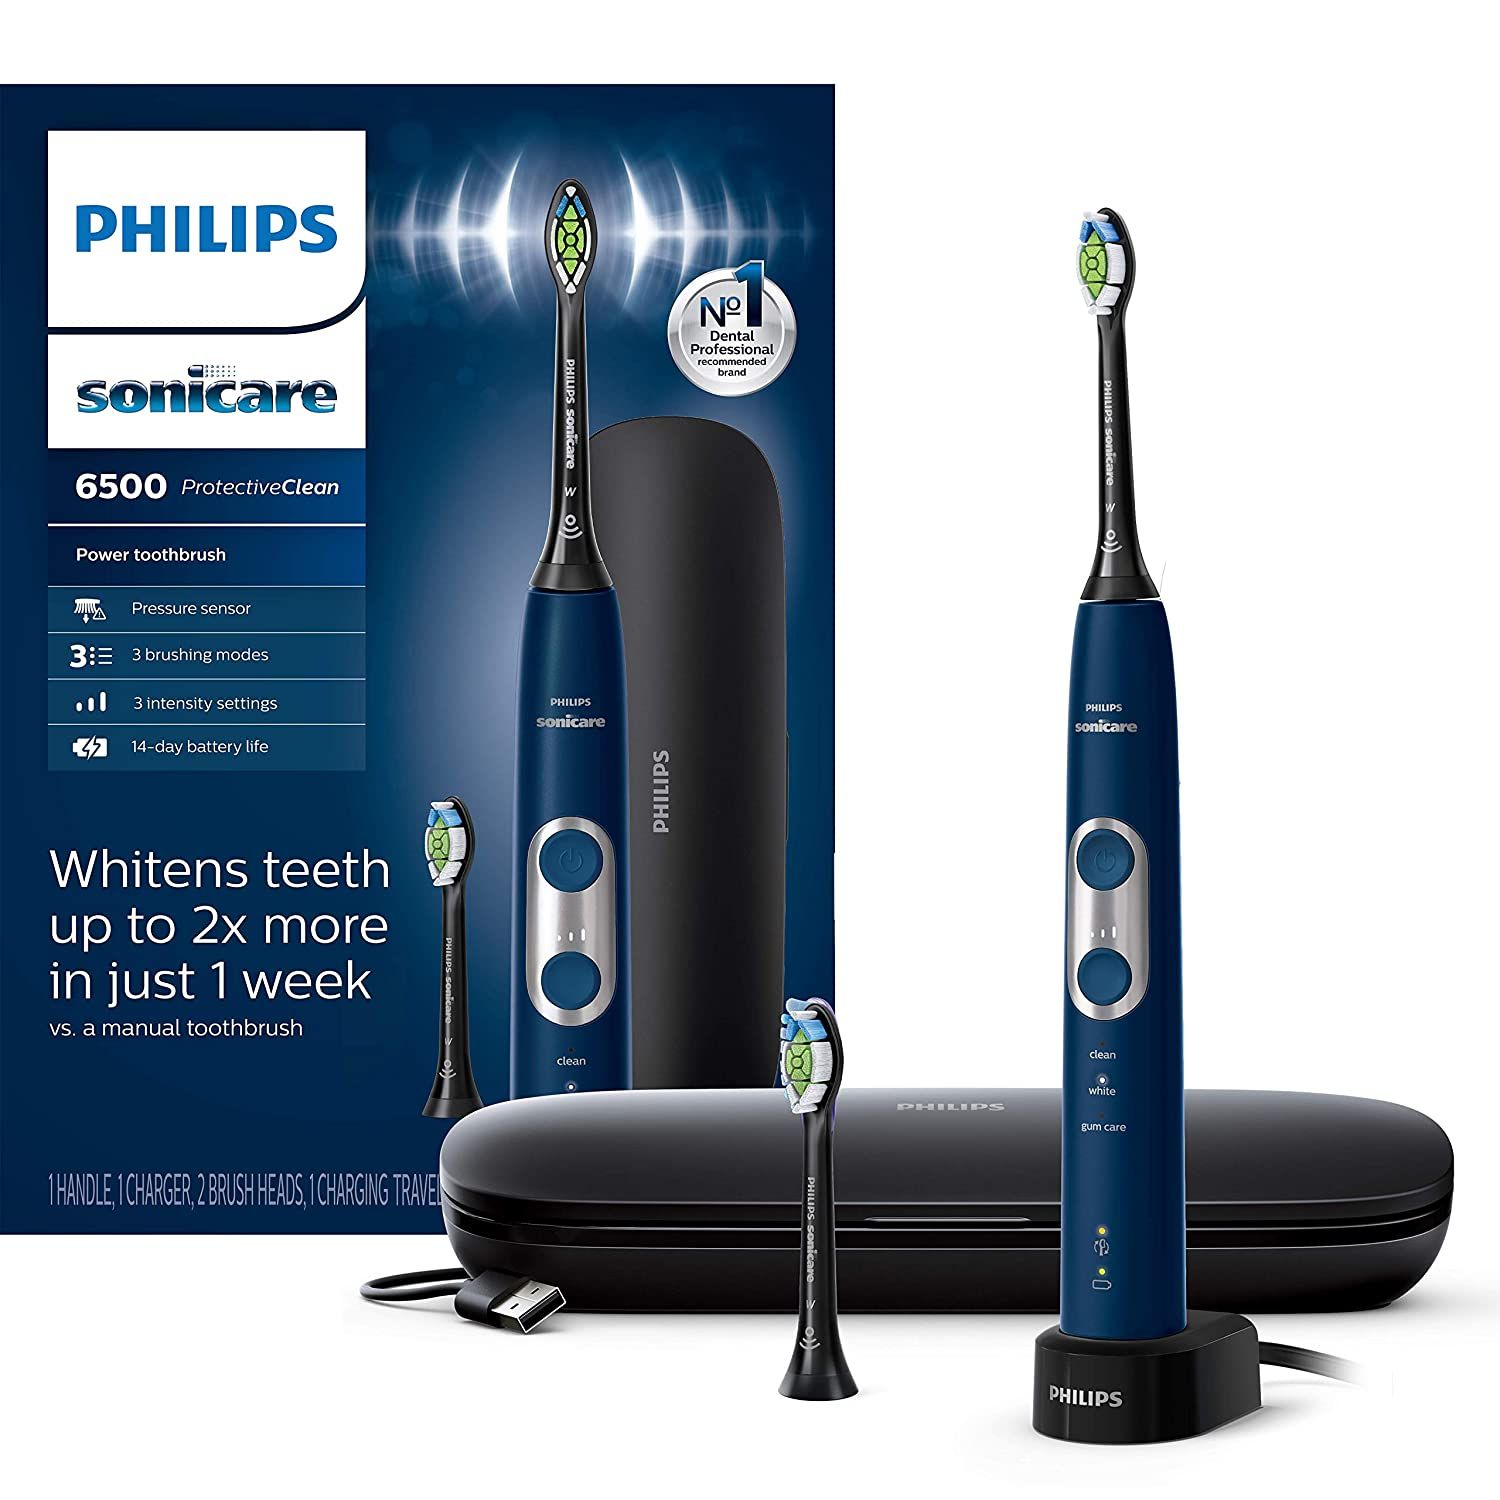  Philips Sonicare 6500 Protective Clean 